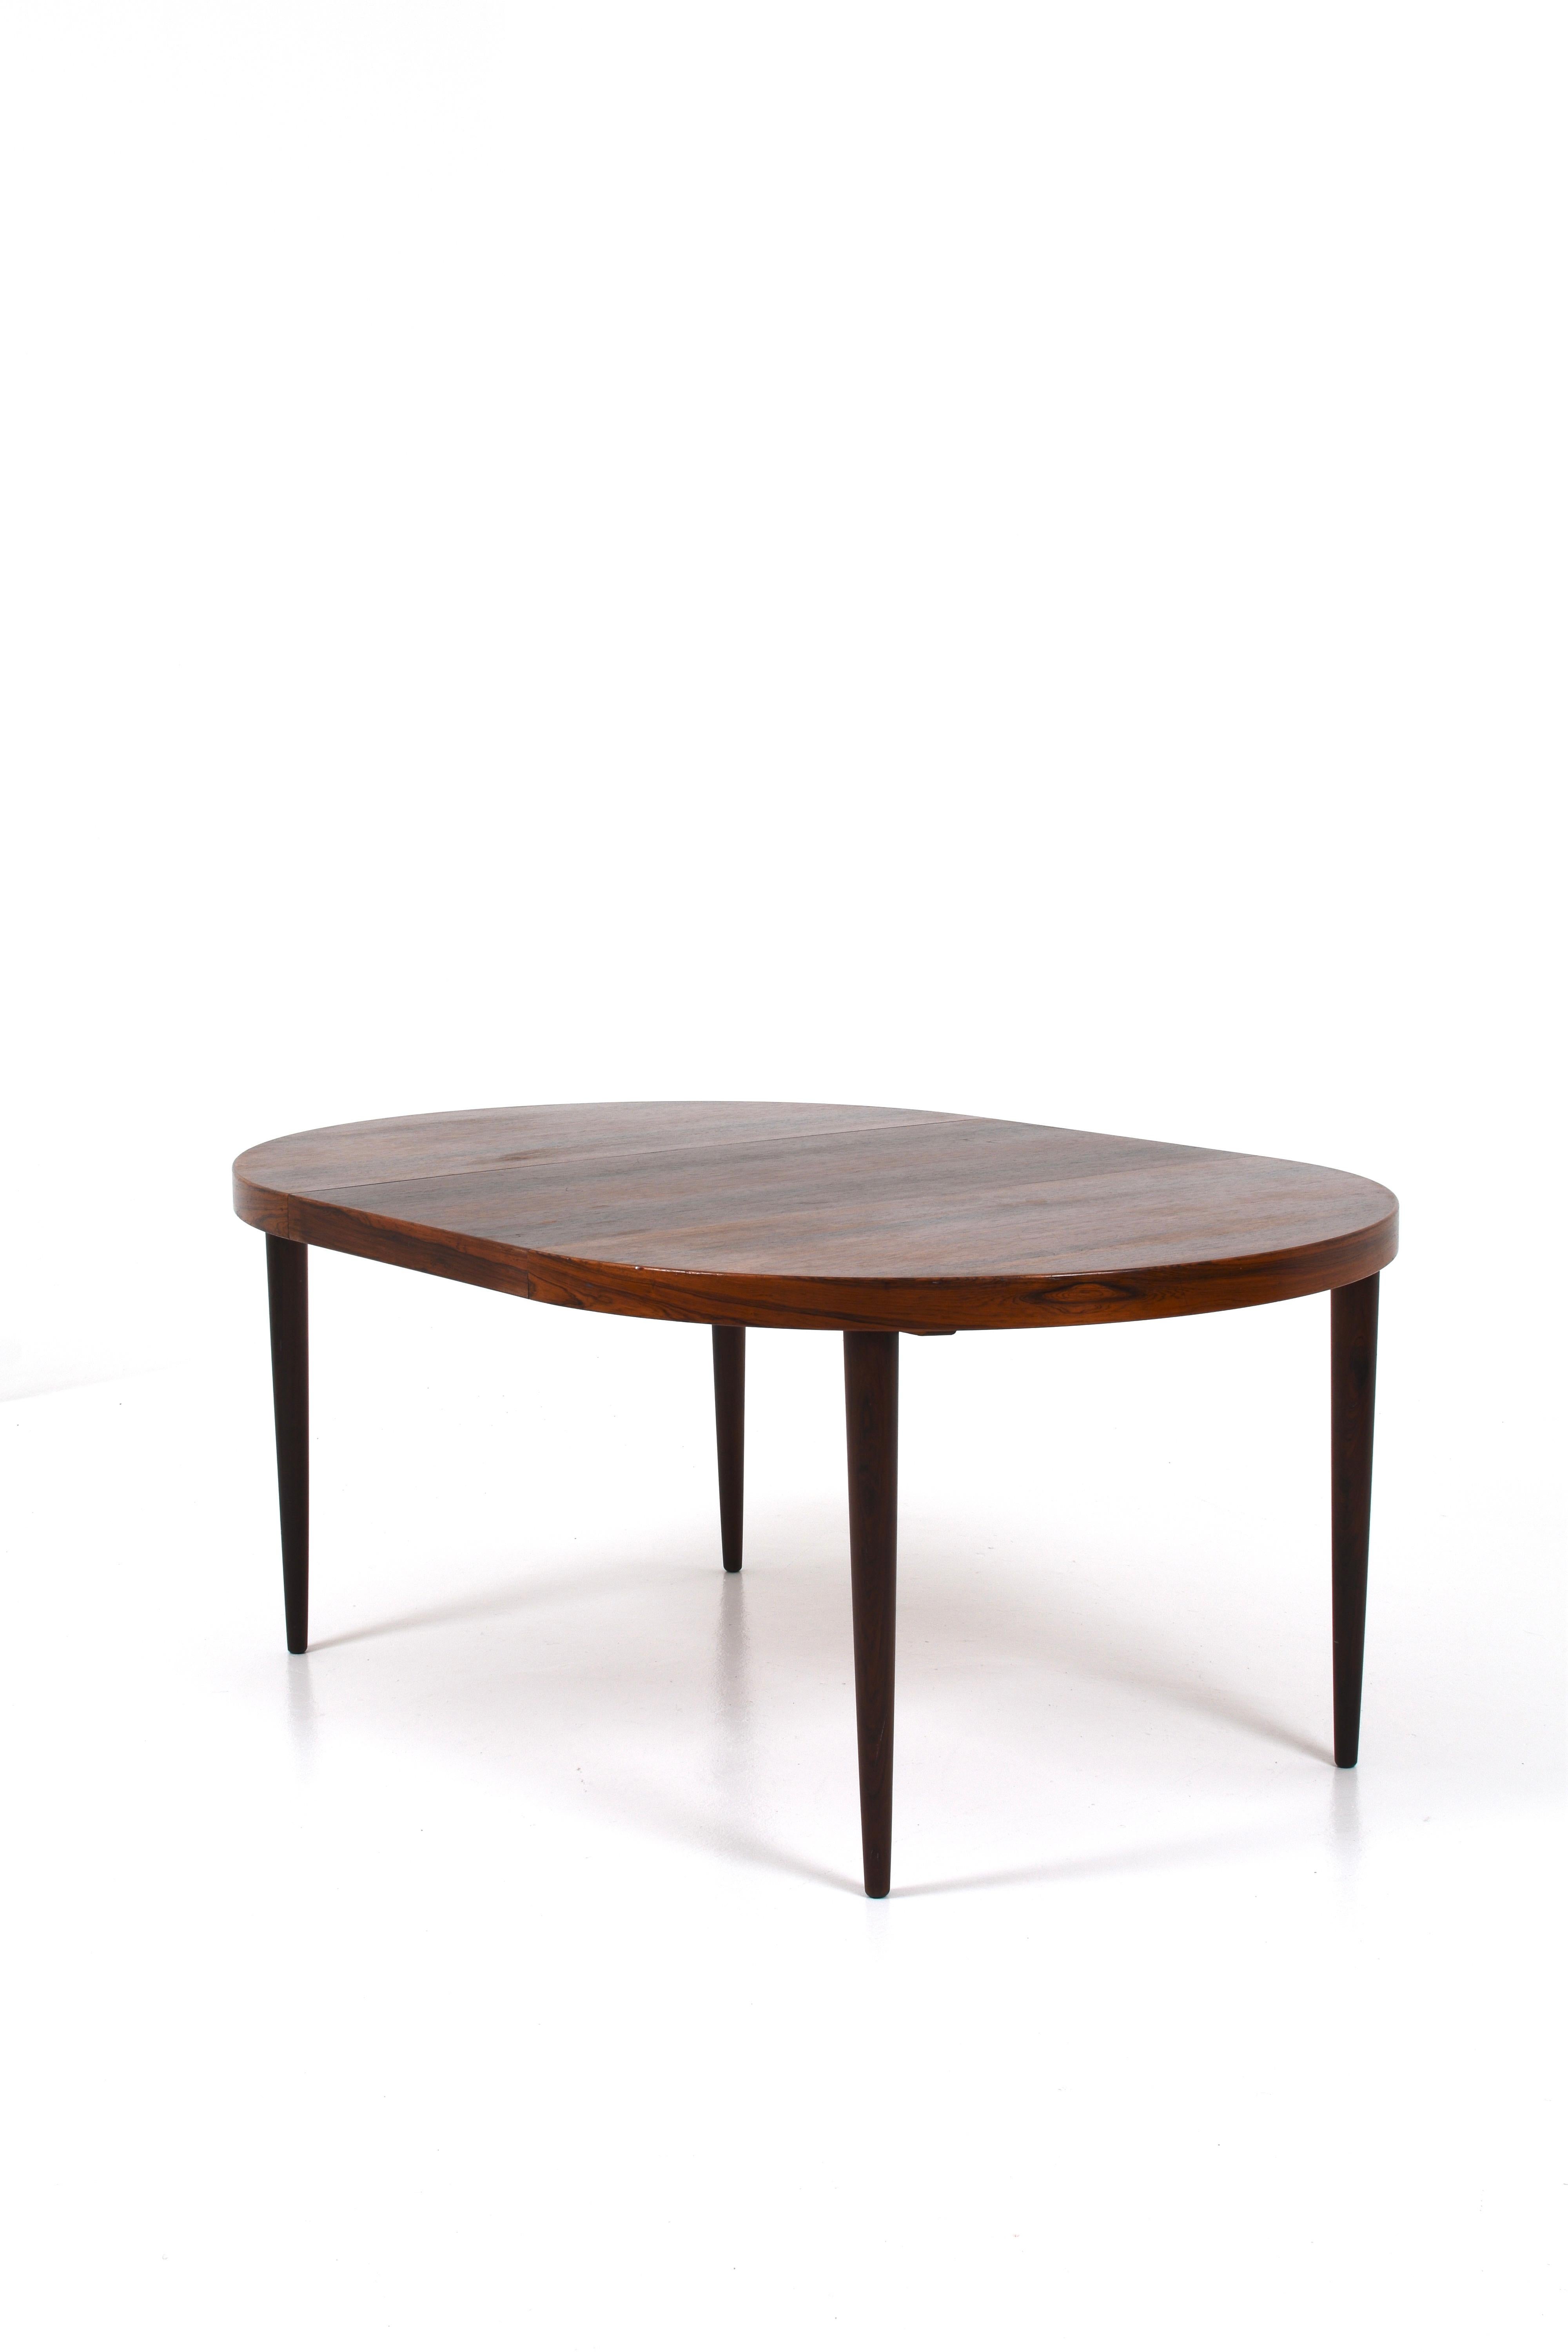 Mid-20th Century Extendable Round Dining Table by Kai Kristiansen, Denmark, 1960s For Sale